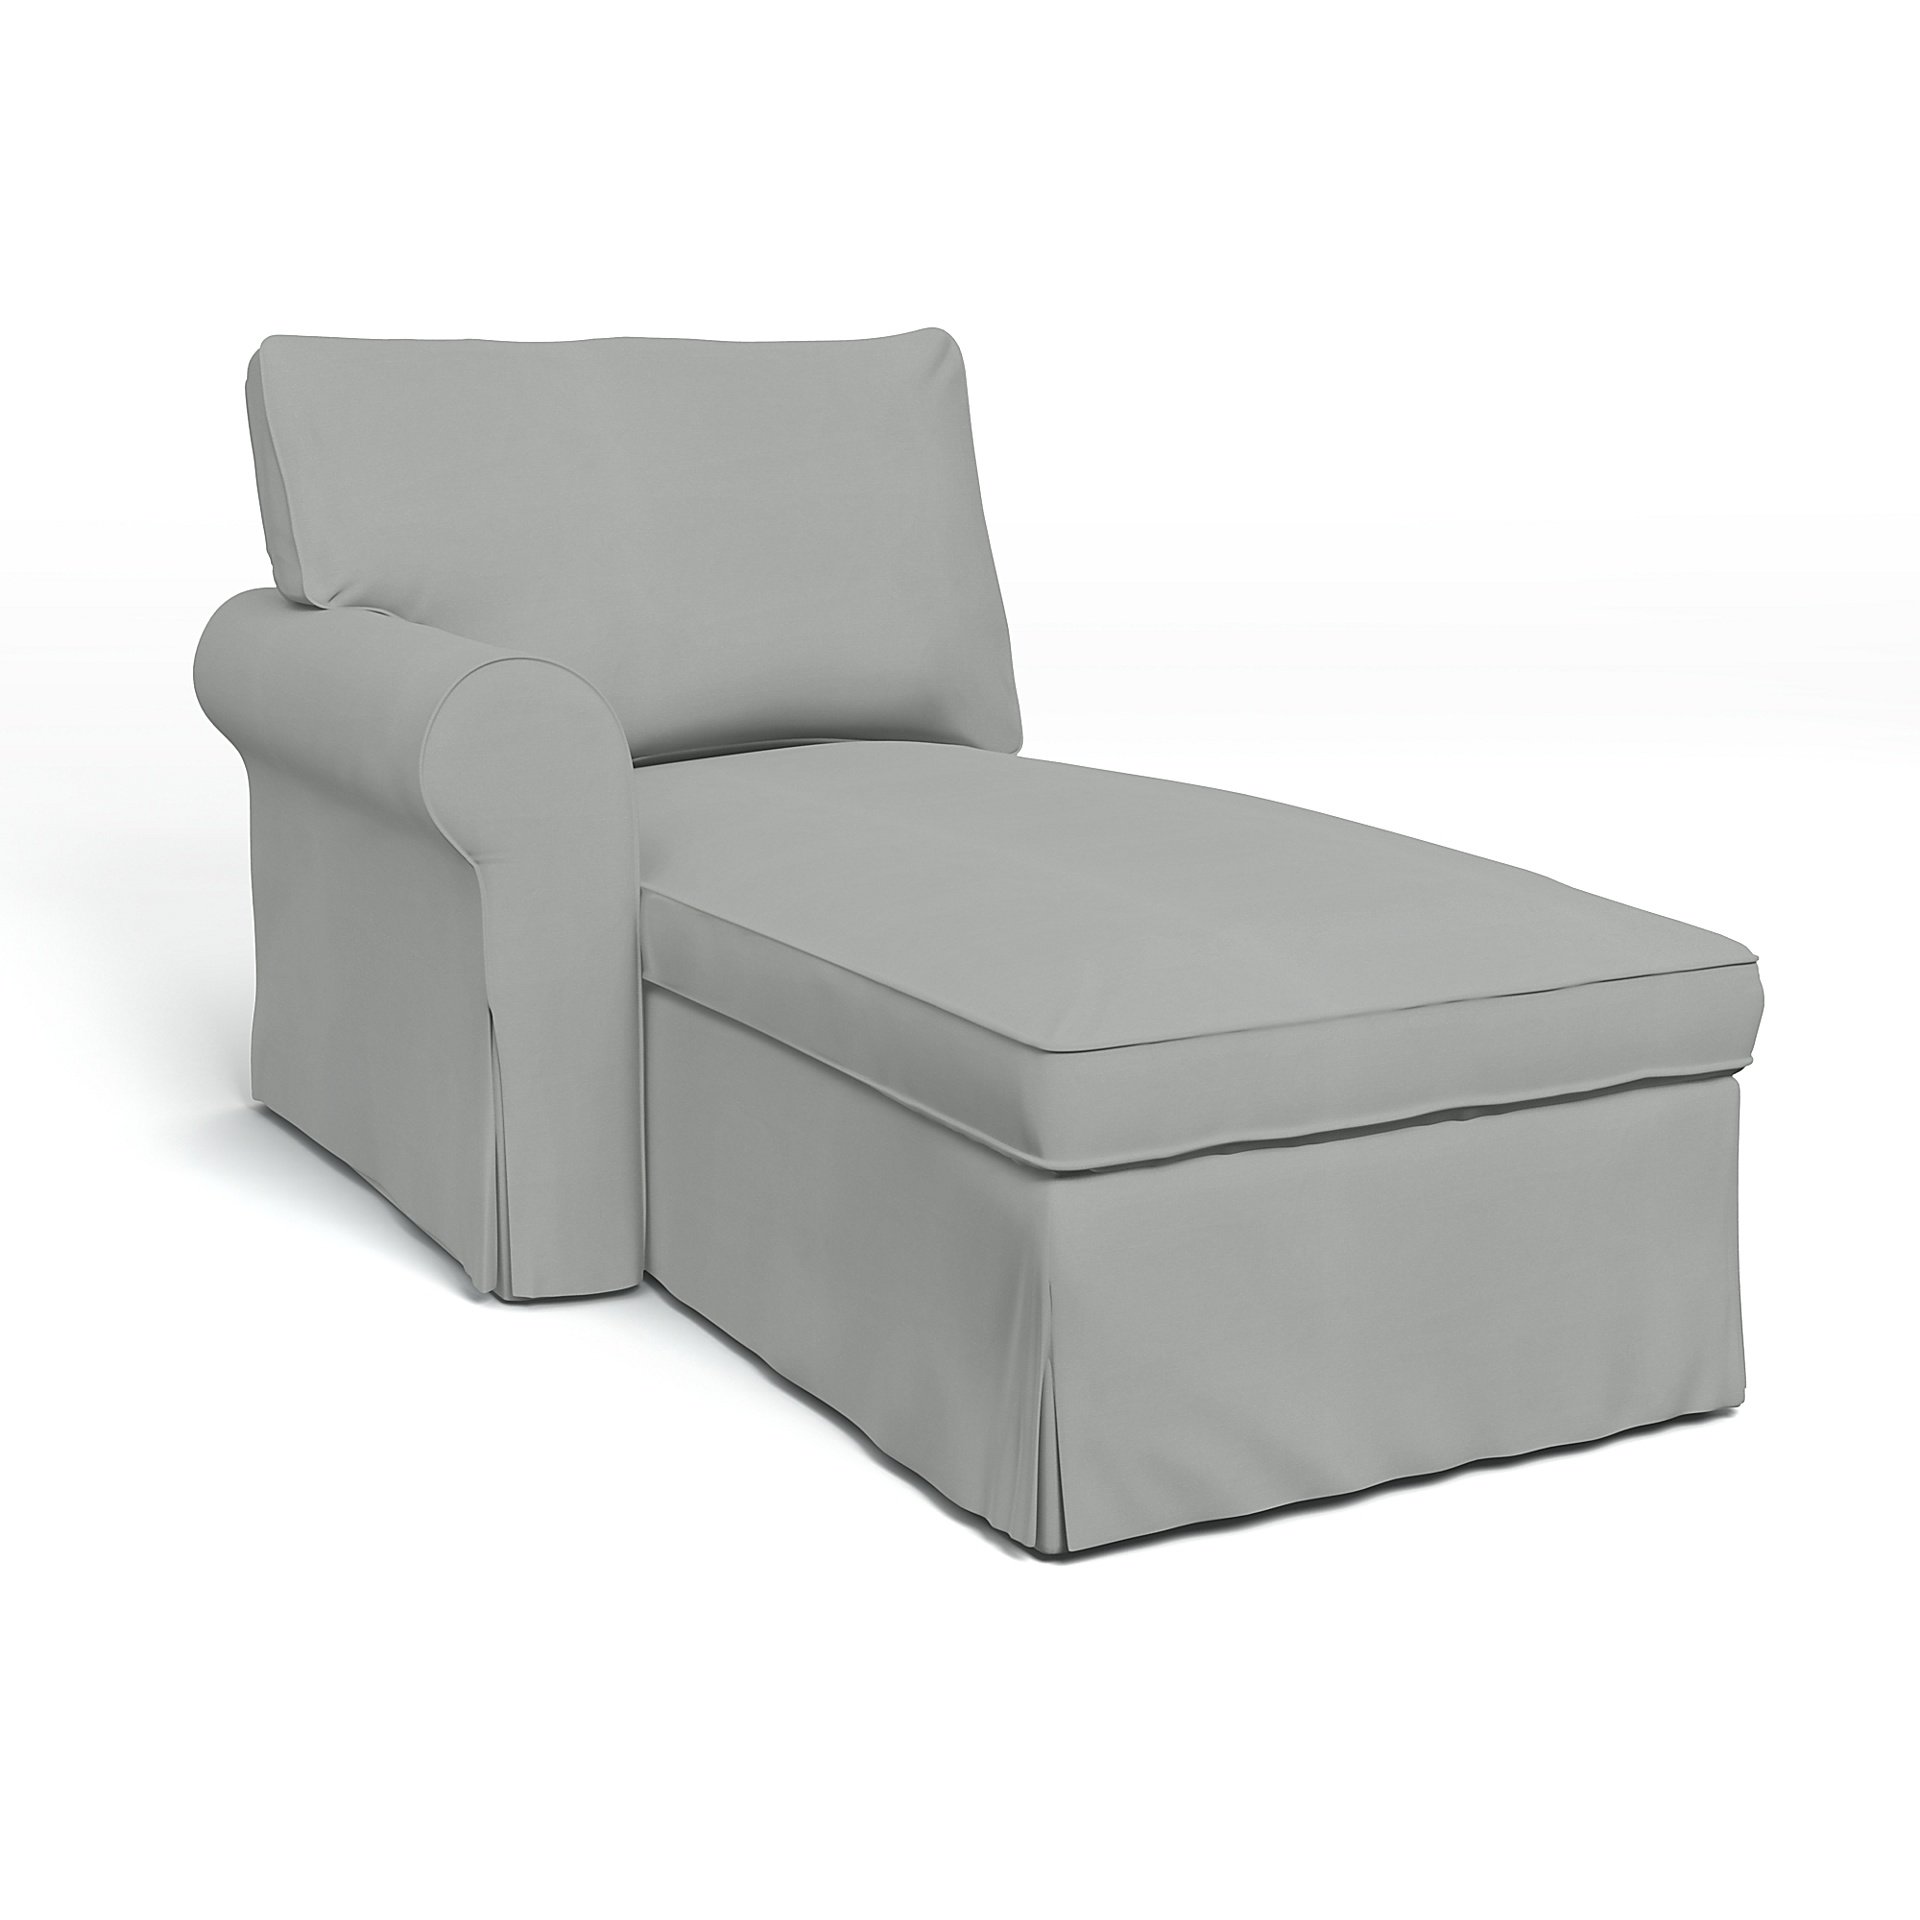 IKEA - Ektorp Chaise with Left Armrest Cover, Silver Grey, Cotton - Bemz